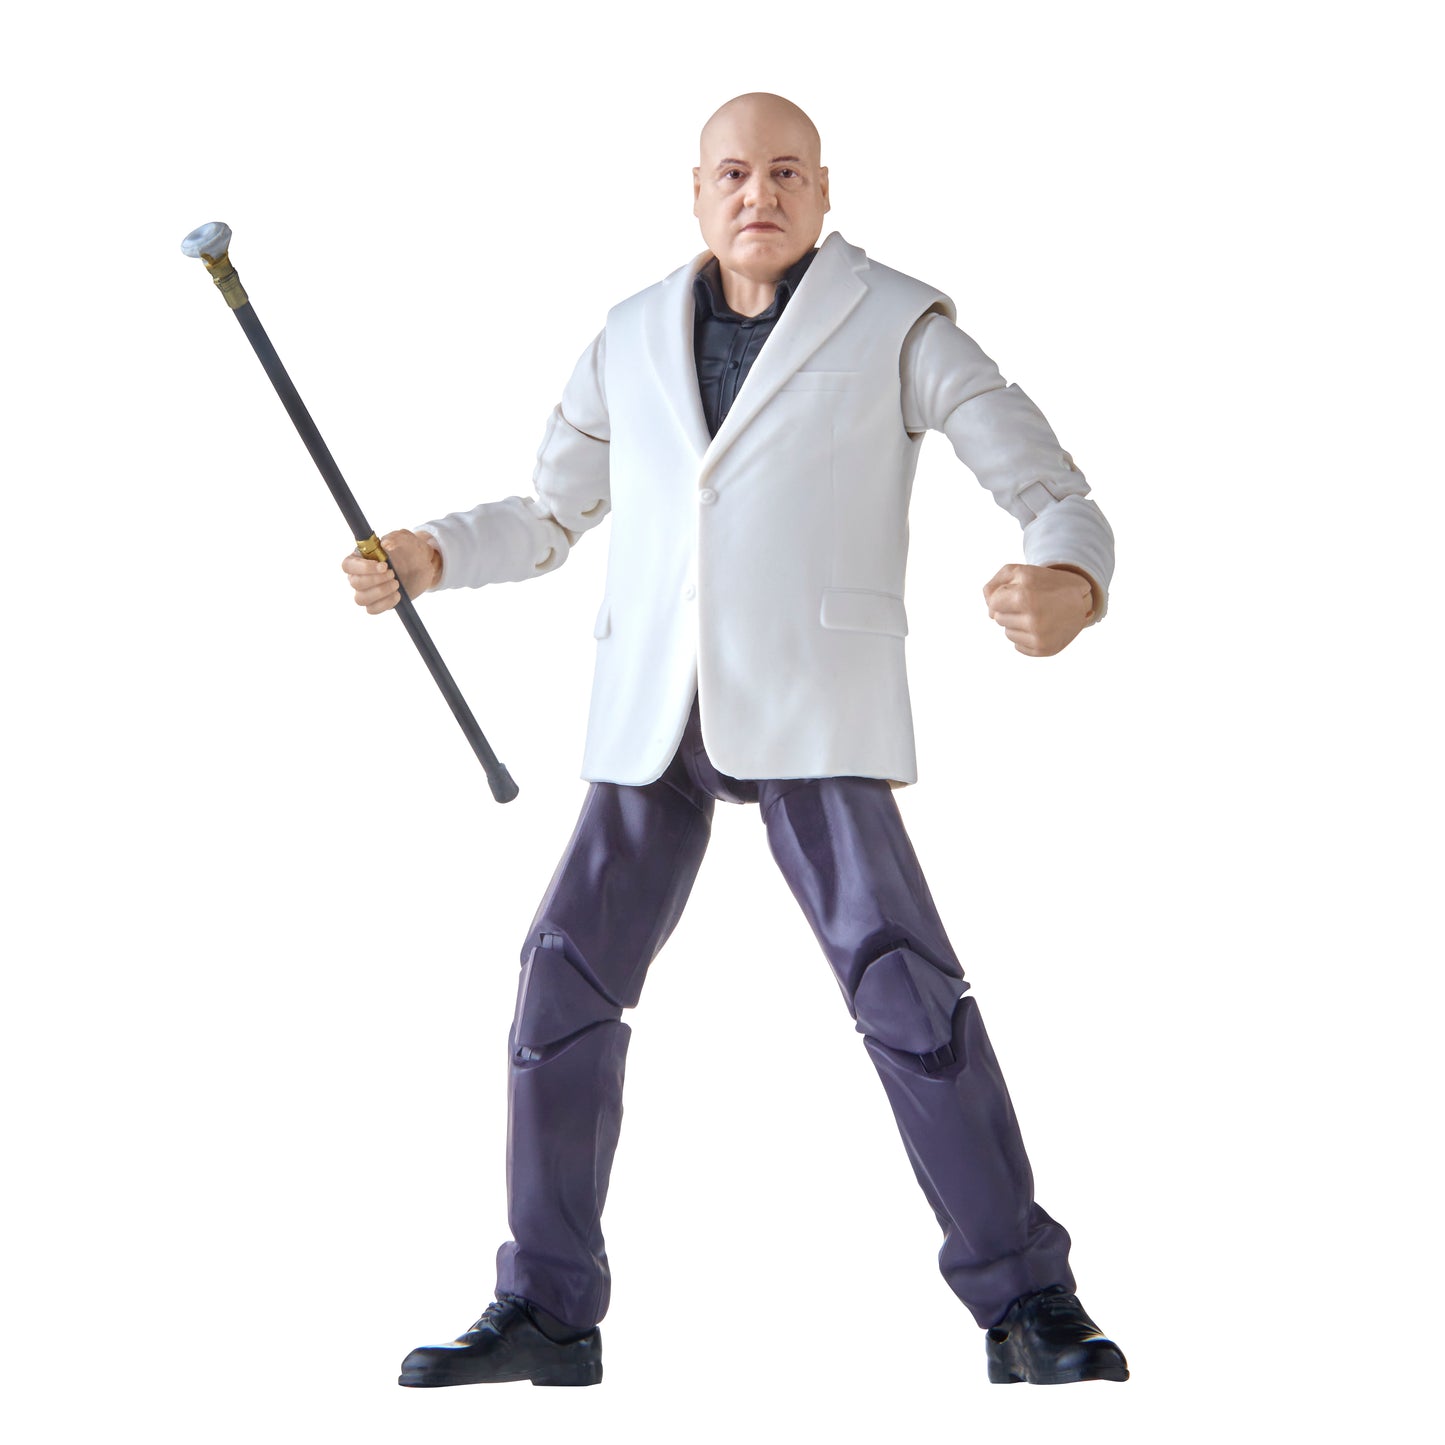  Kingpin Action Figure 6-Inch Toy - Heretoserveyou